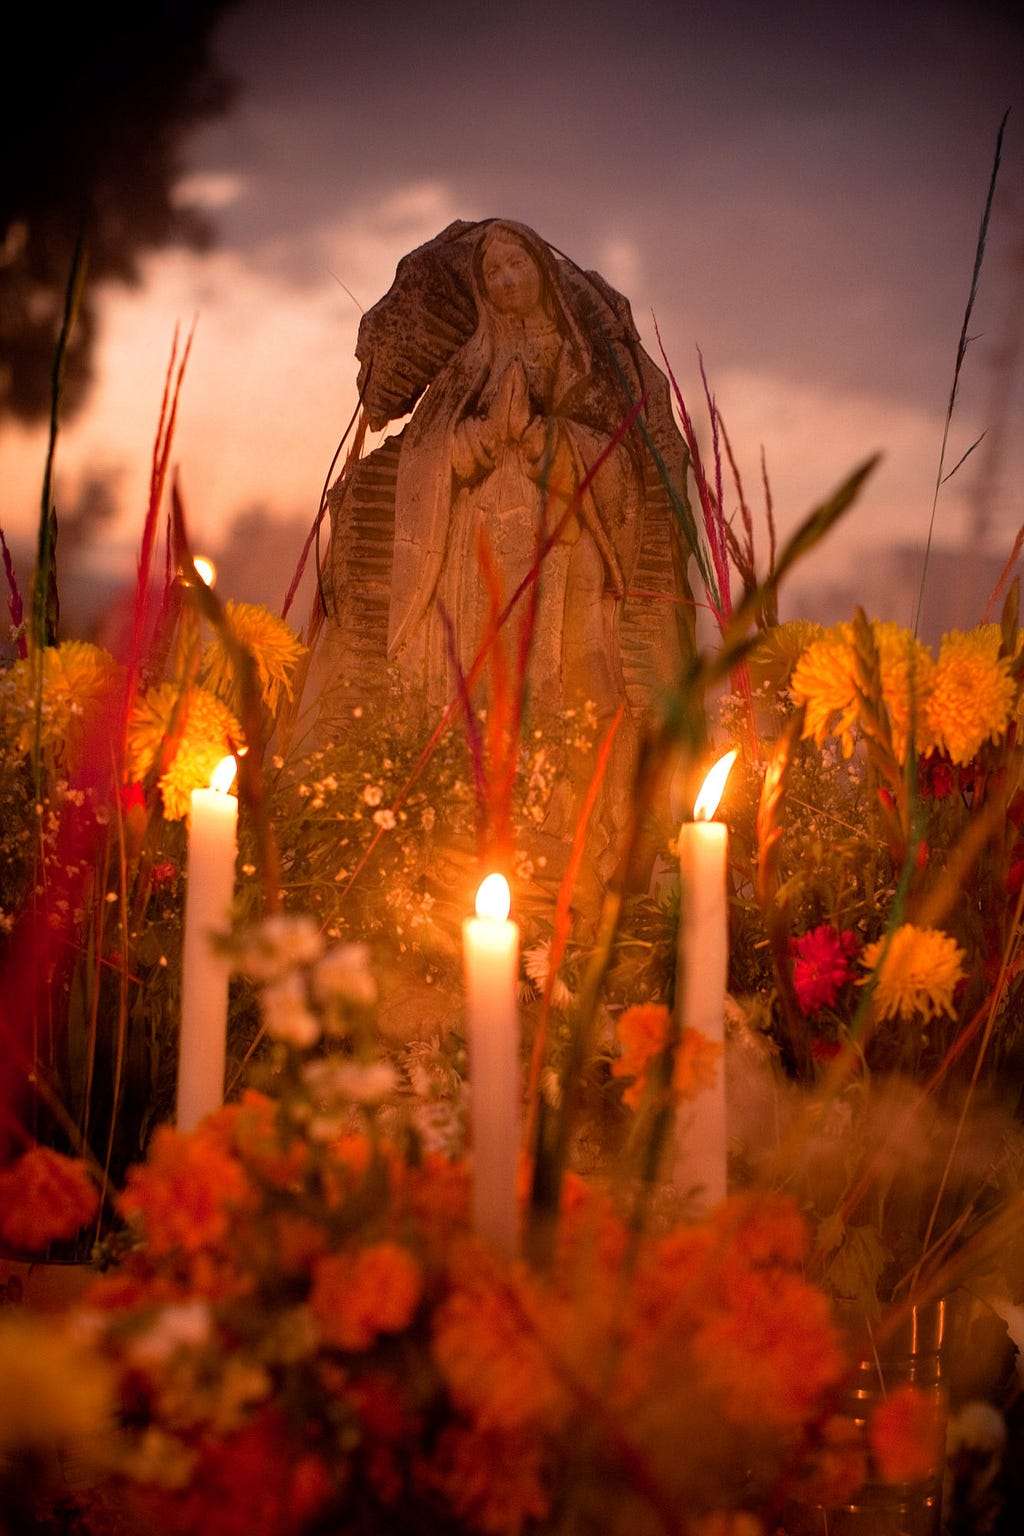 Families decorate graves for the candlelight vigil known as La Alumbrada during Day of the Dead in Mixquic. ©James Fisher 2017 All Rights Reserved